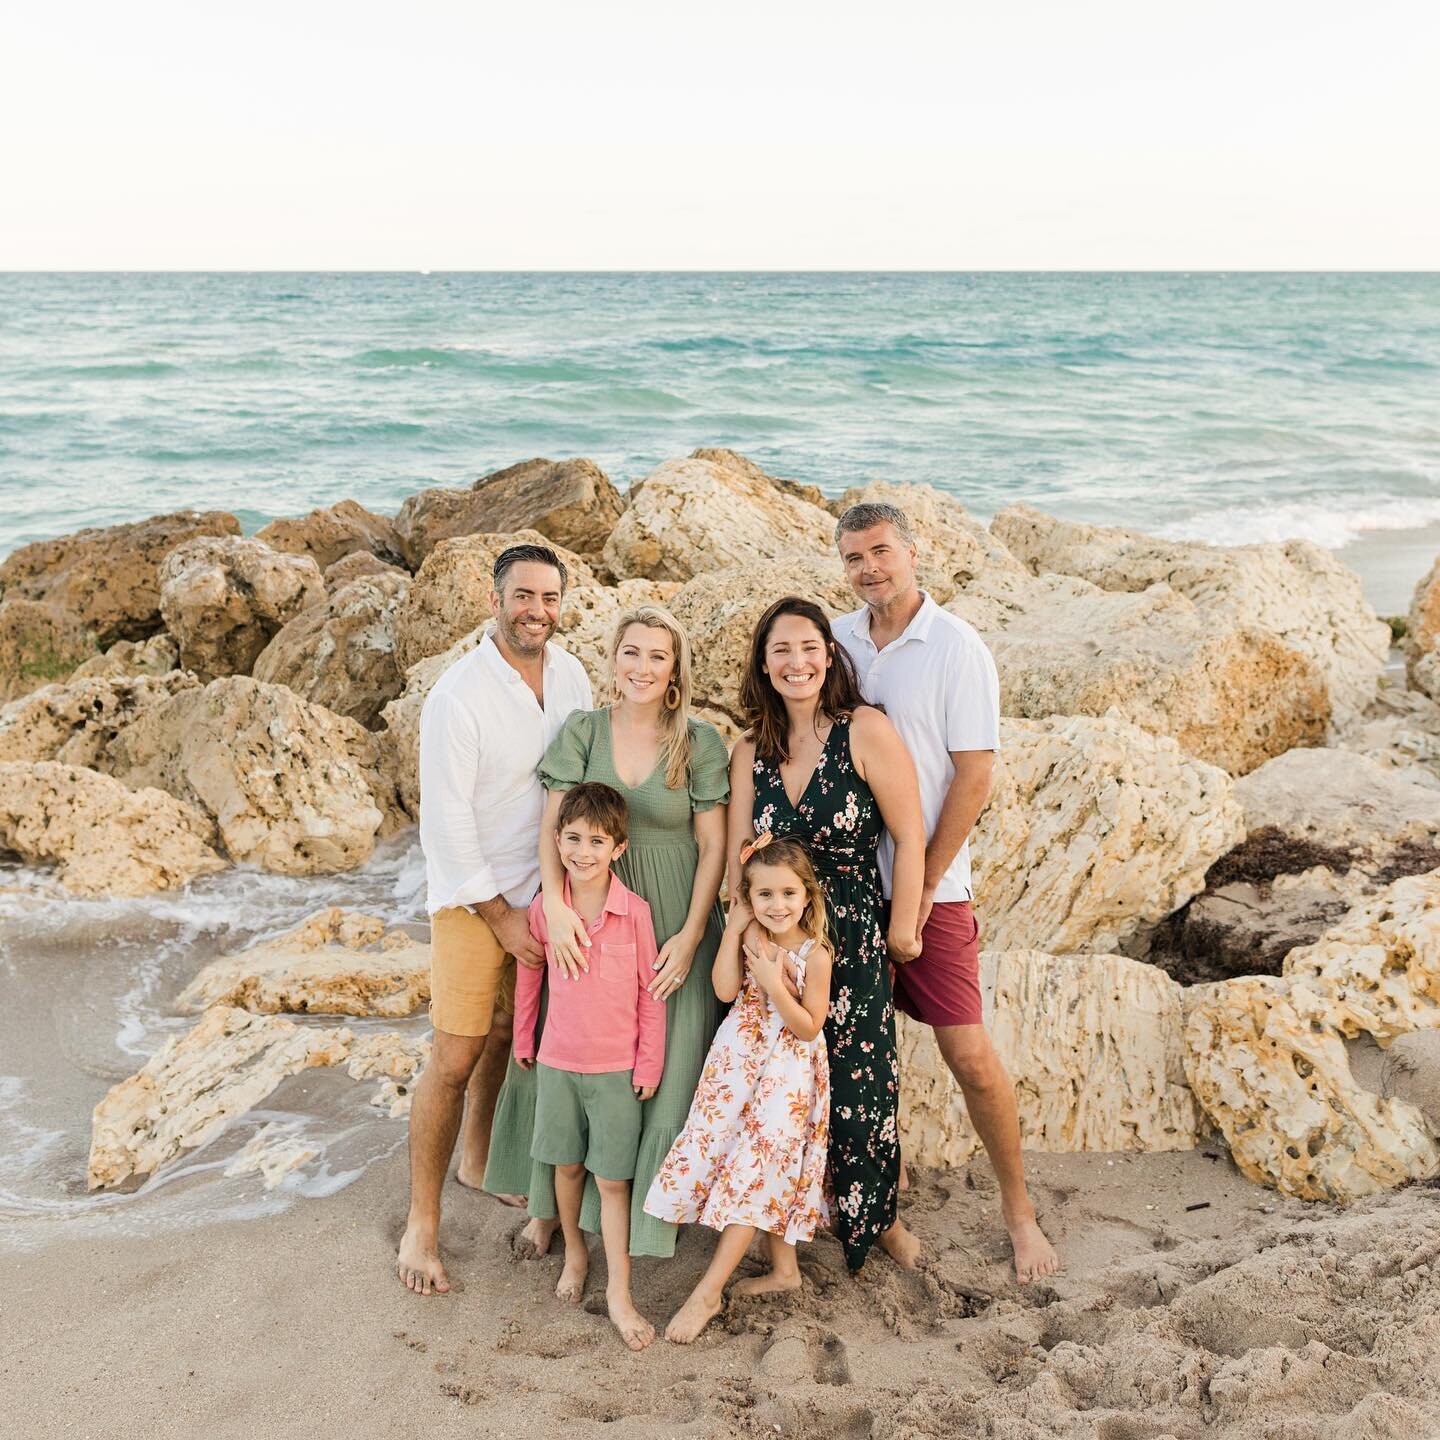 A little sneak peek at this sweet family session on Palm Beach!